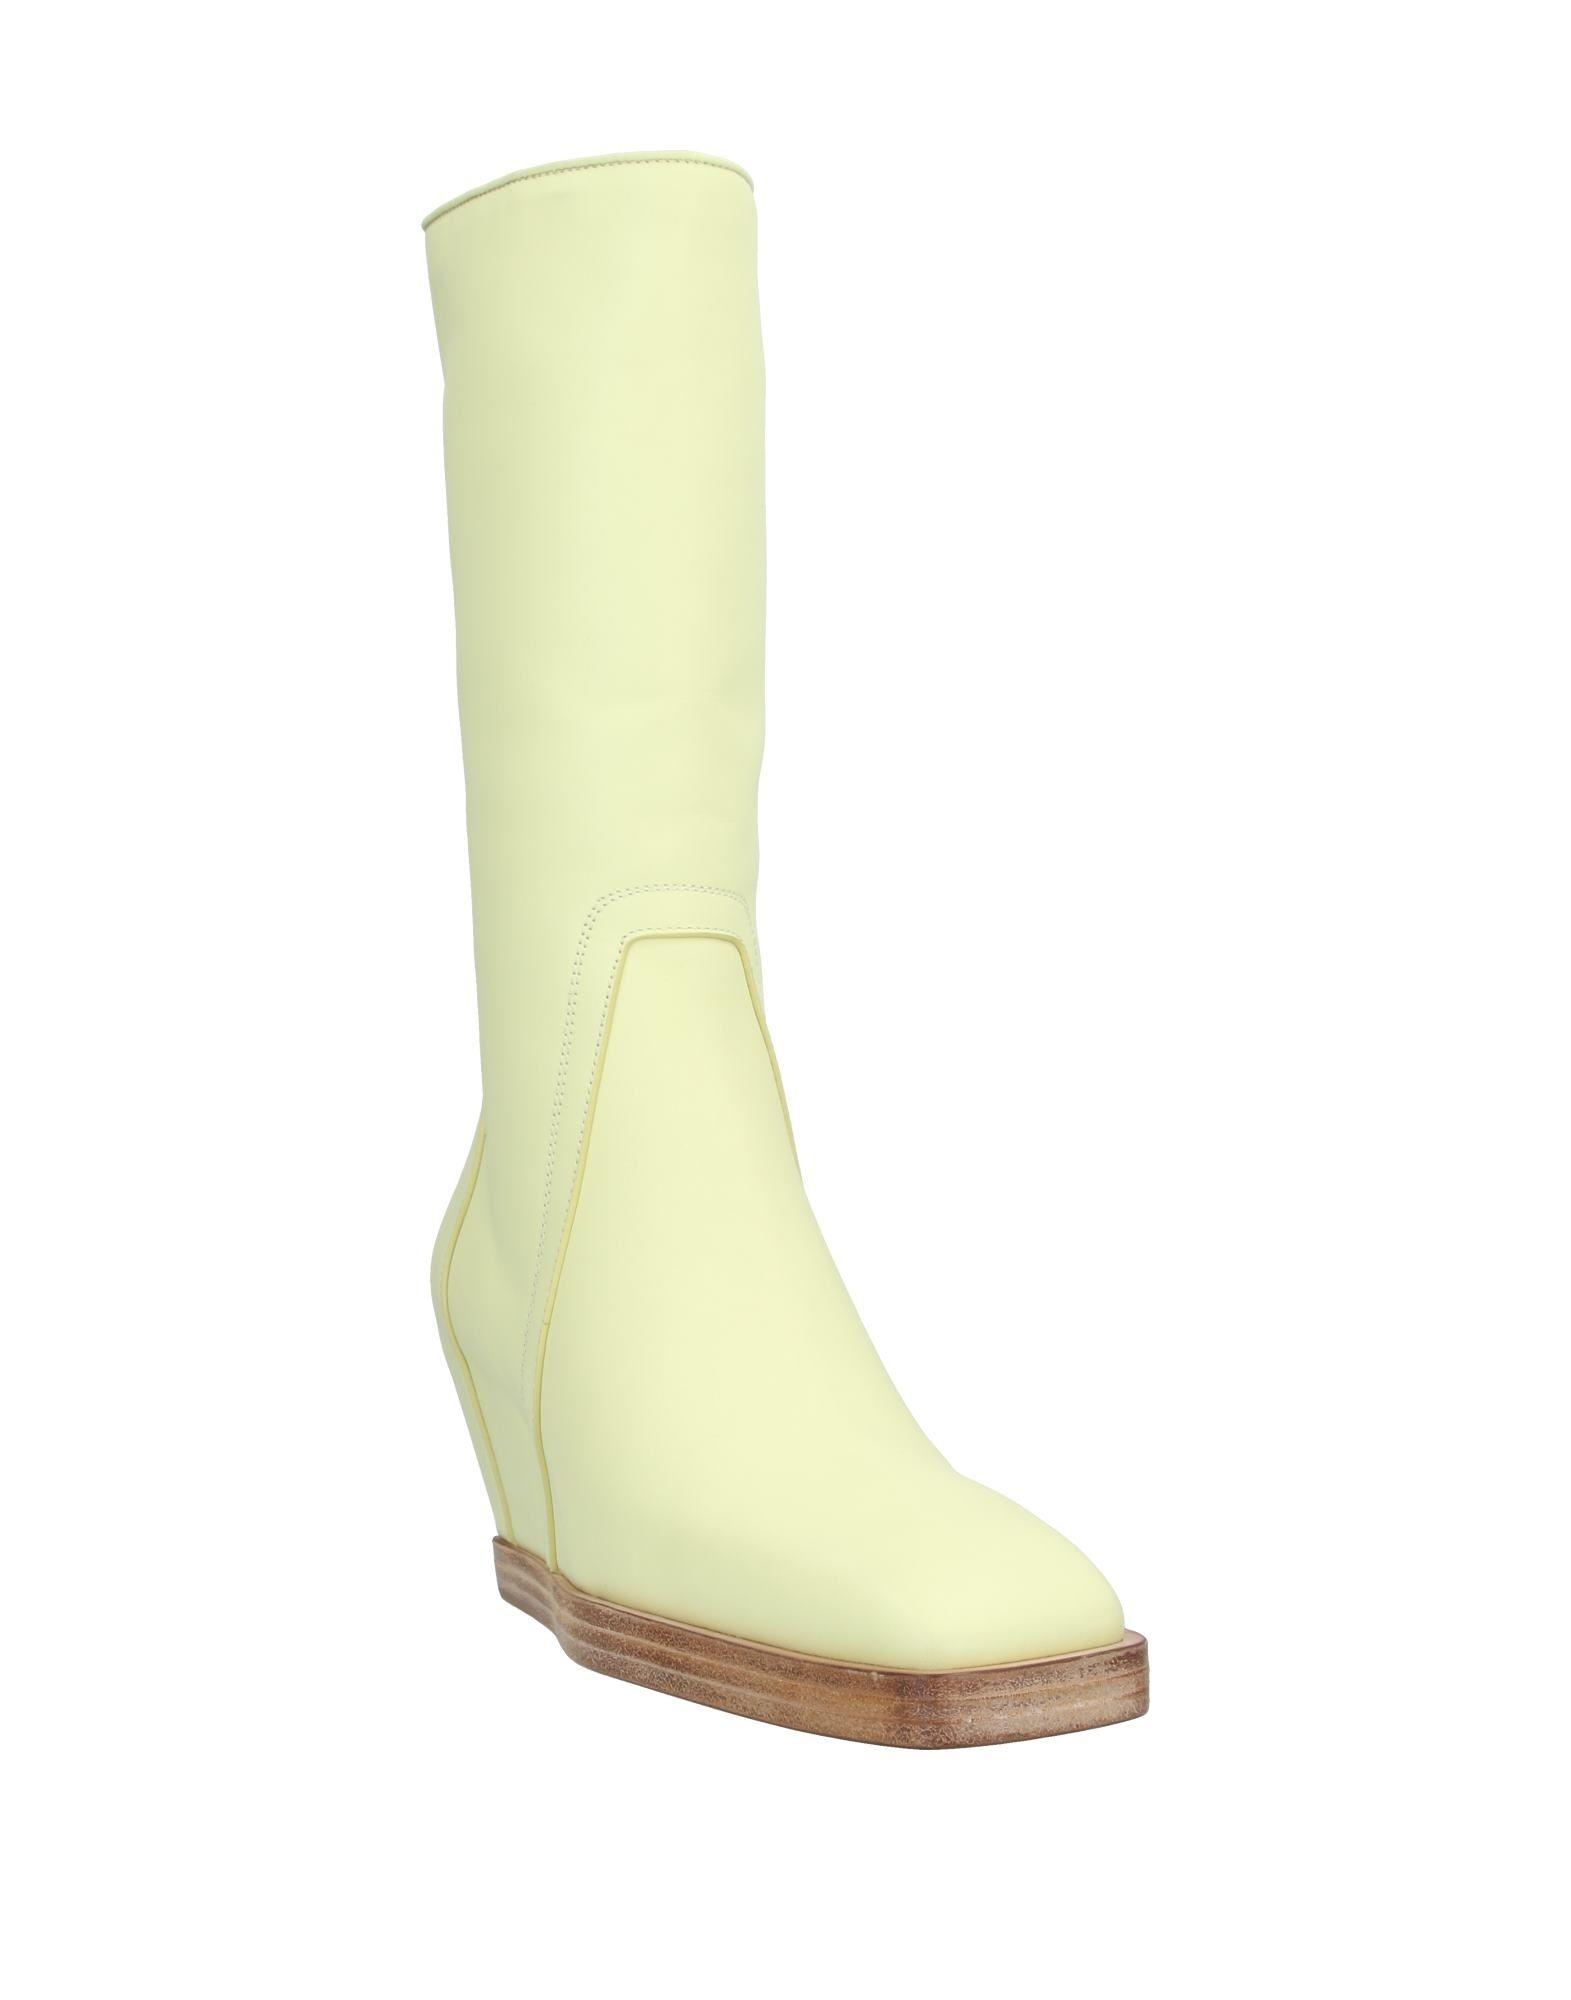 Rick Owens Leather Knee Boots in Light Yellow (Yellow) - Lyst